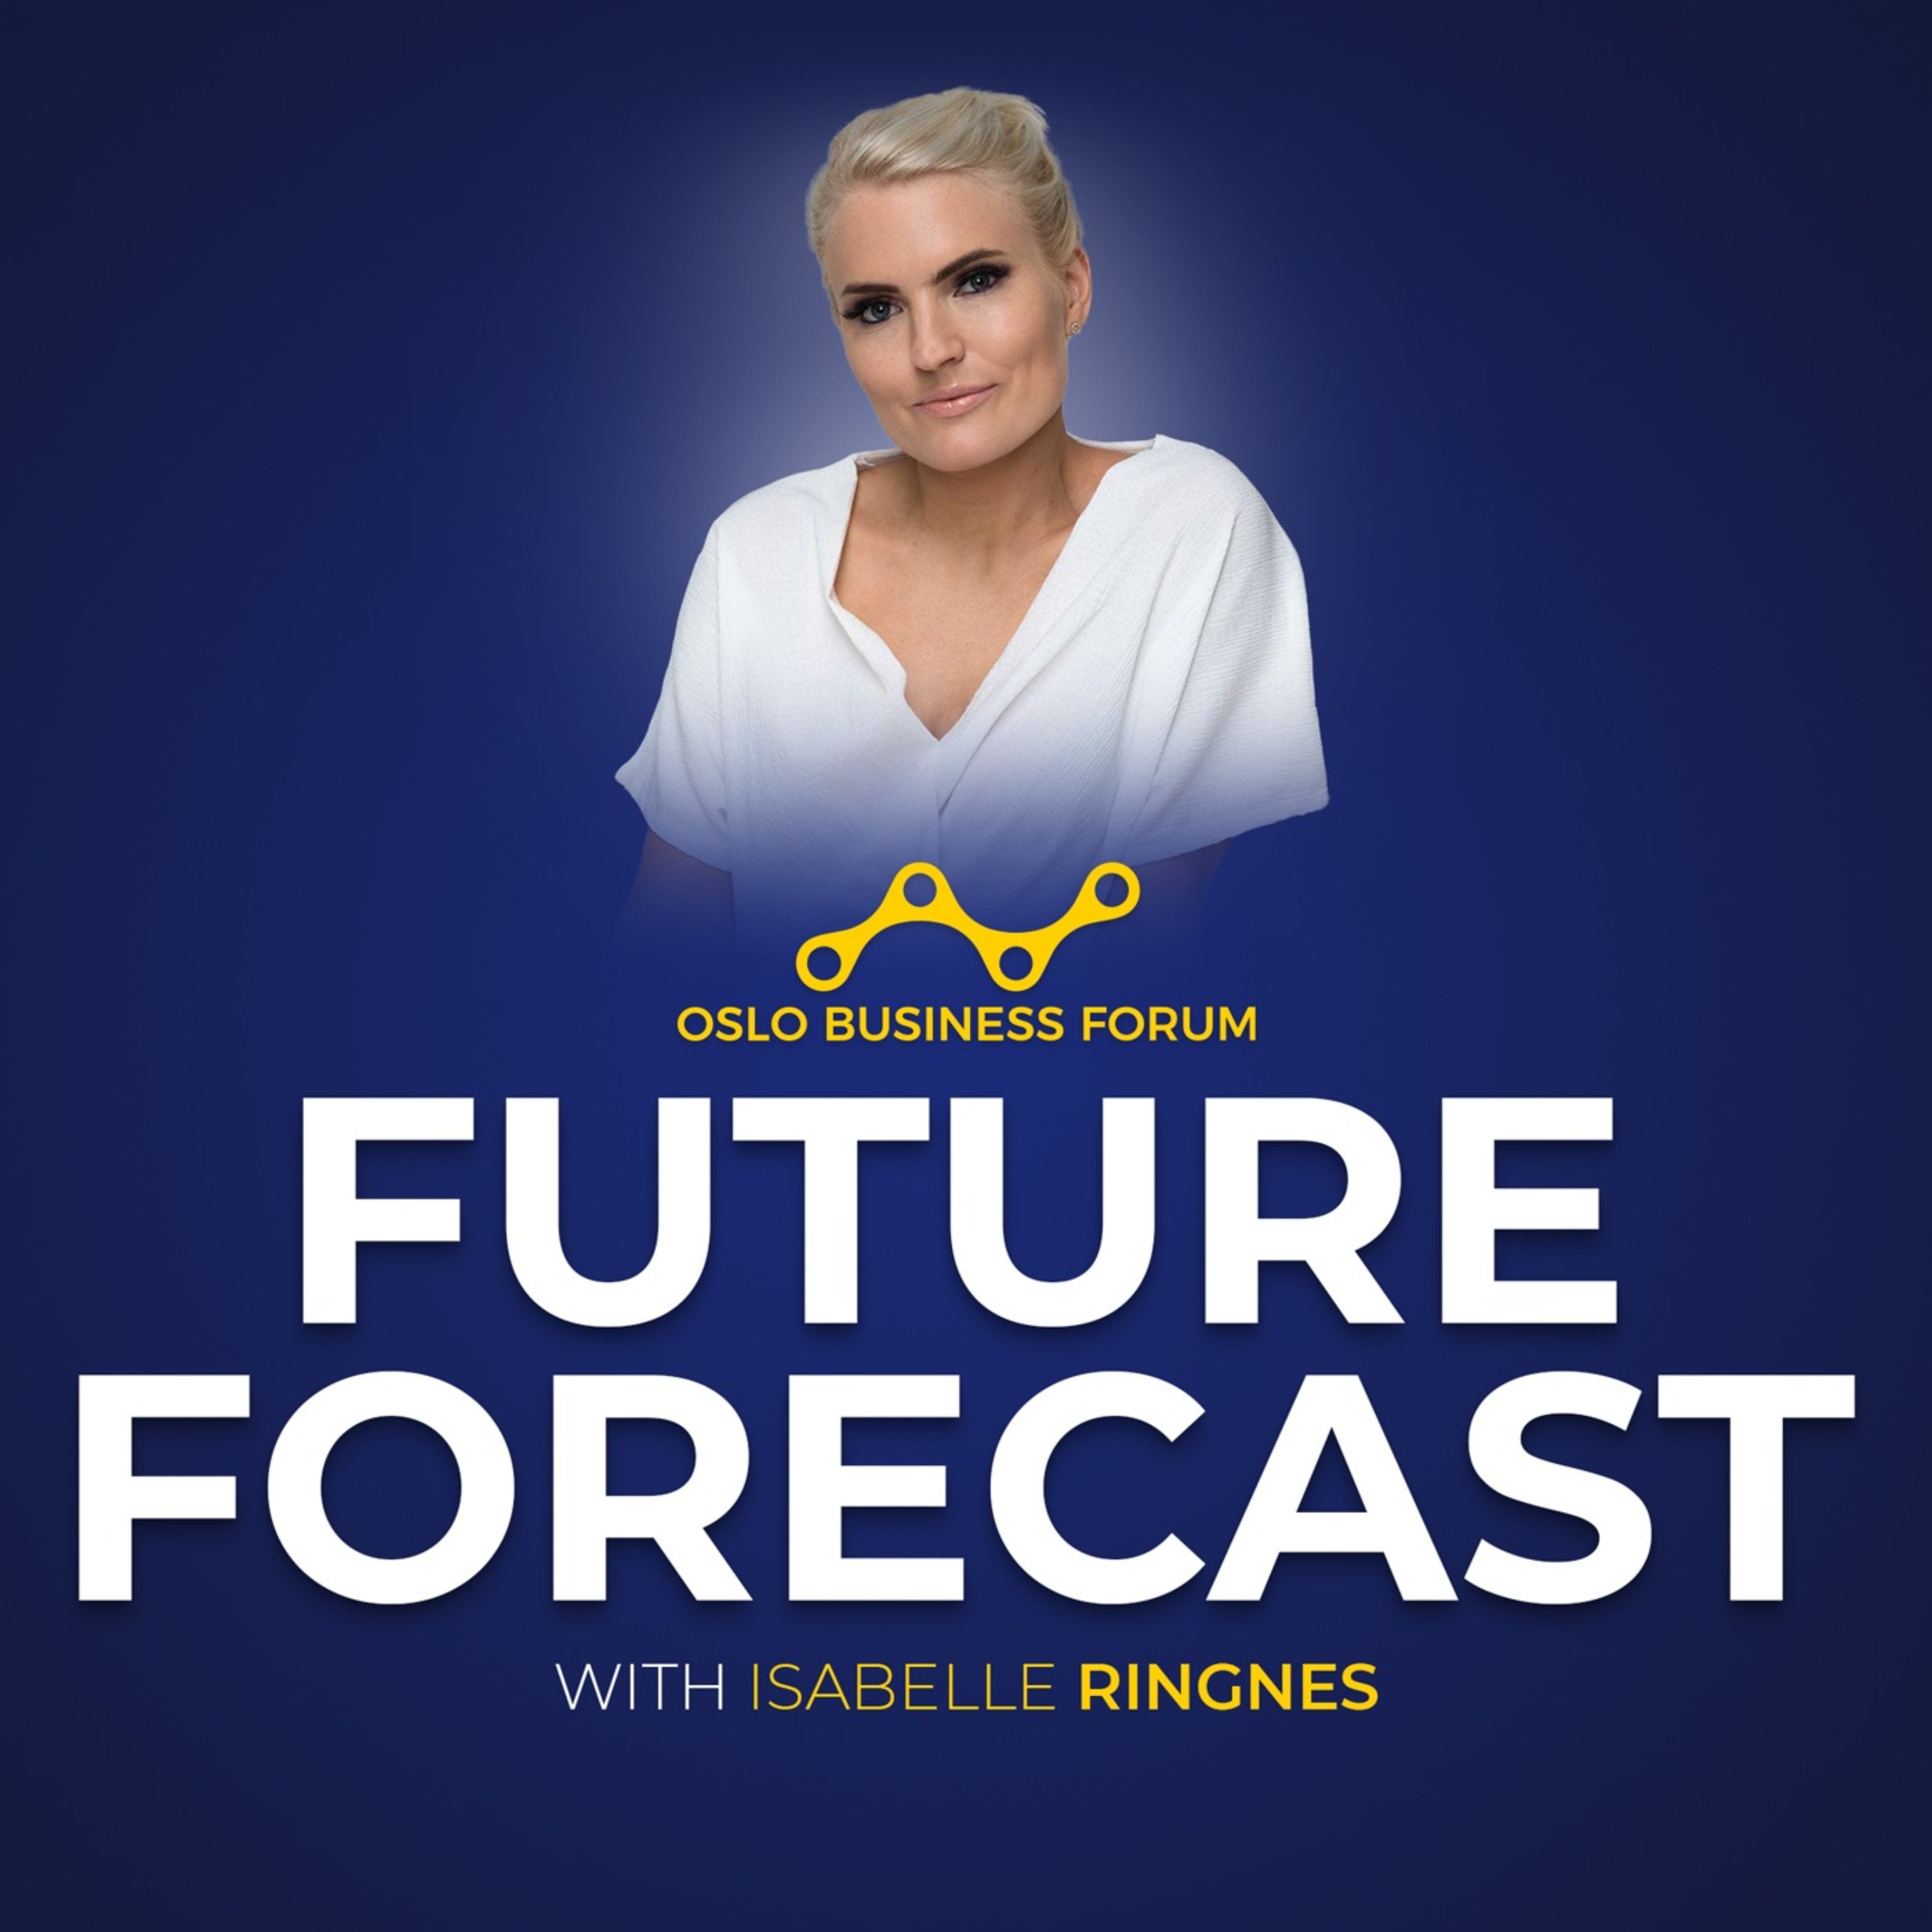 Future Forecast with Isabelle Ringnes